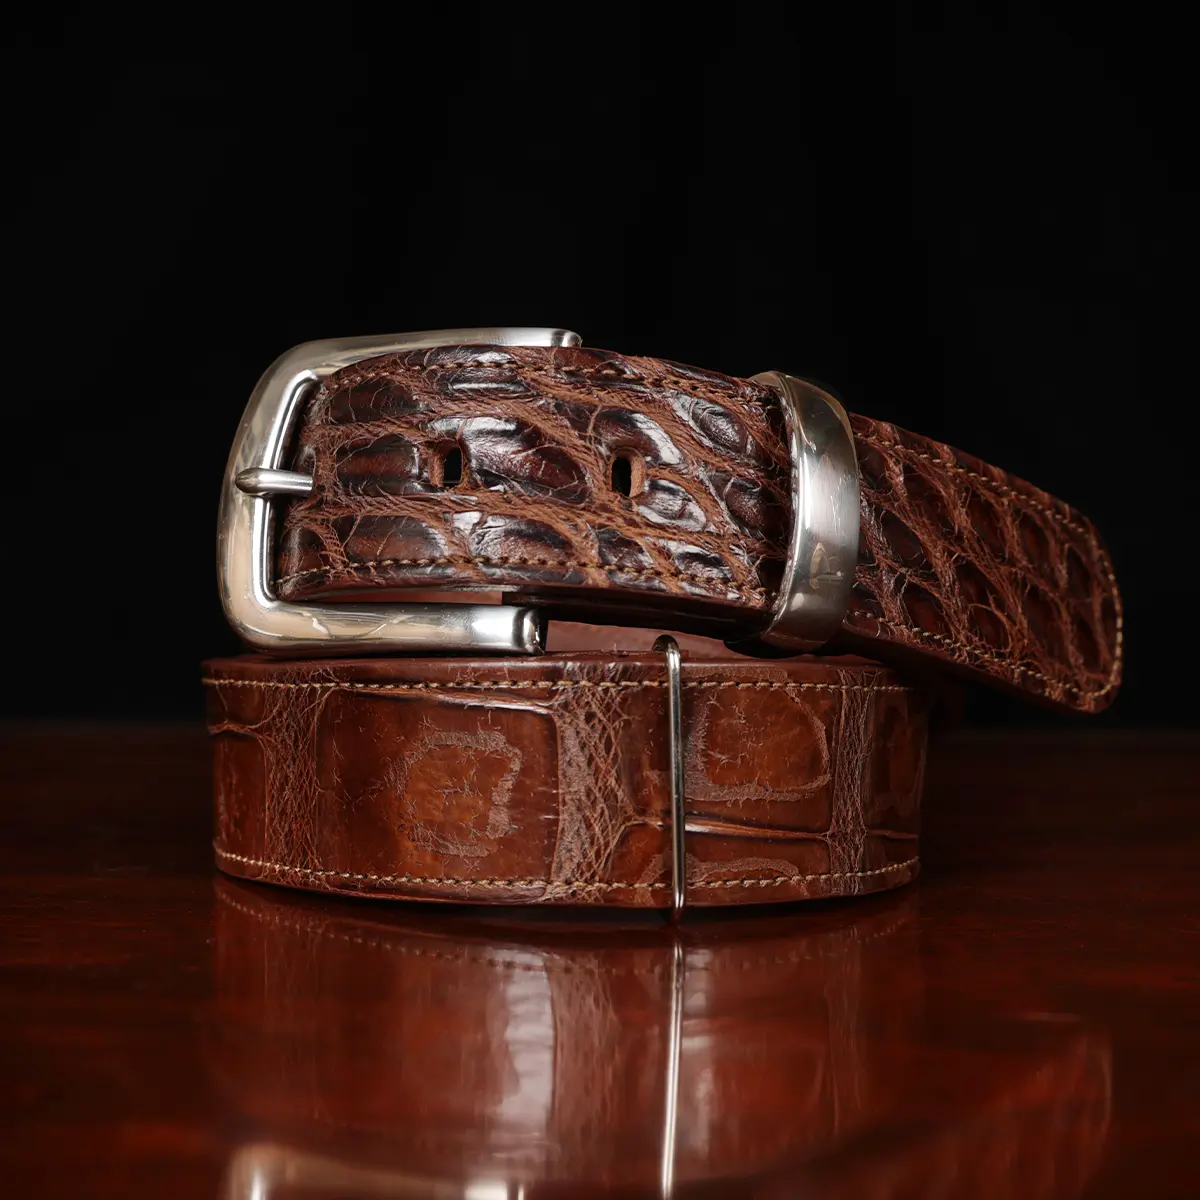 Leather Men's Adjustable Belt, Style NO.4, Full-Grain Brown Italian Bridle Leather, Nickel-finish Hardware, Size XL - Made in USA by Colonel Littleton